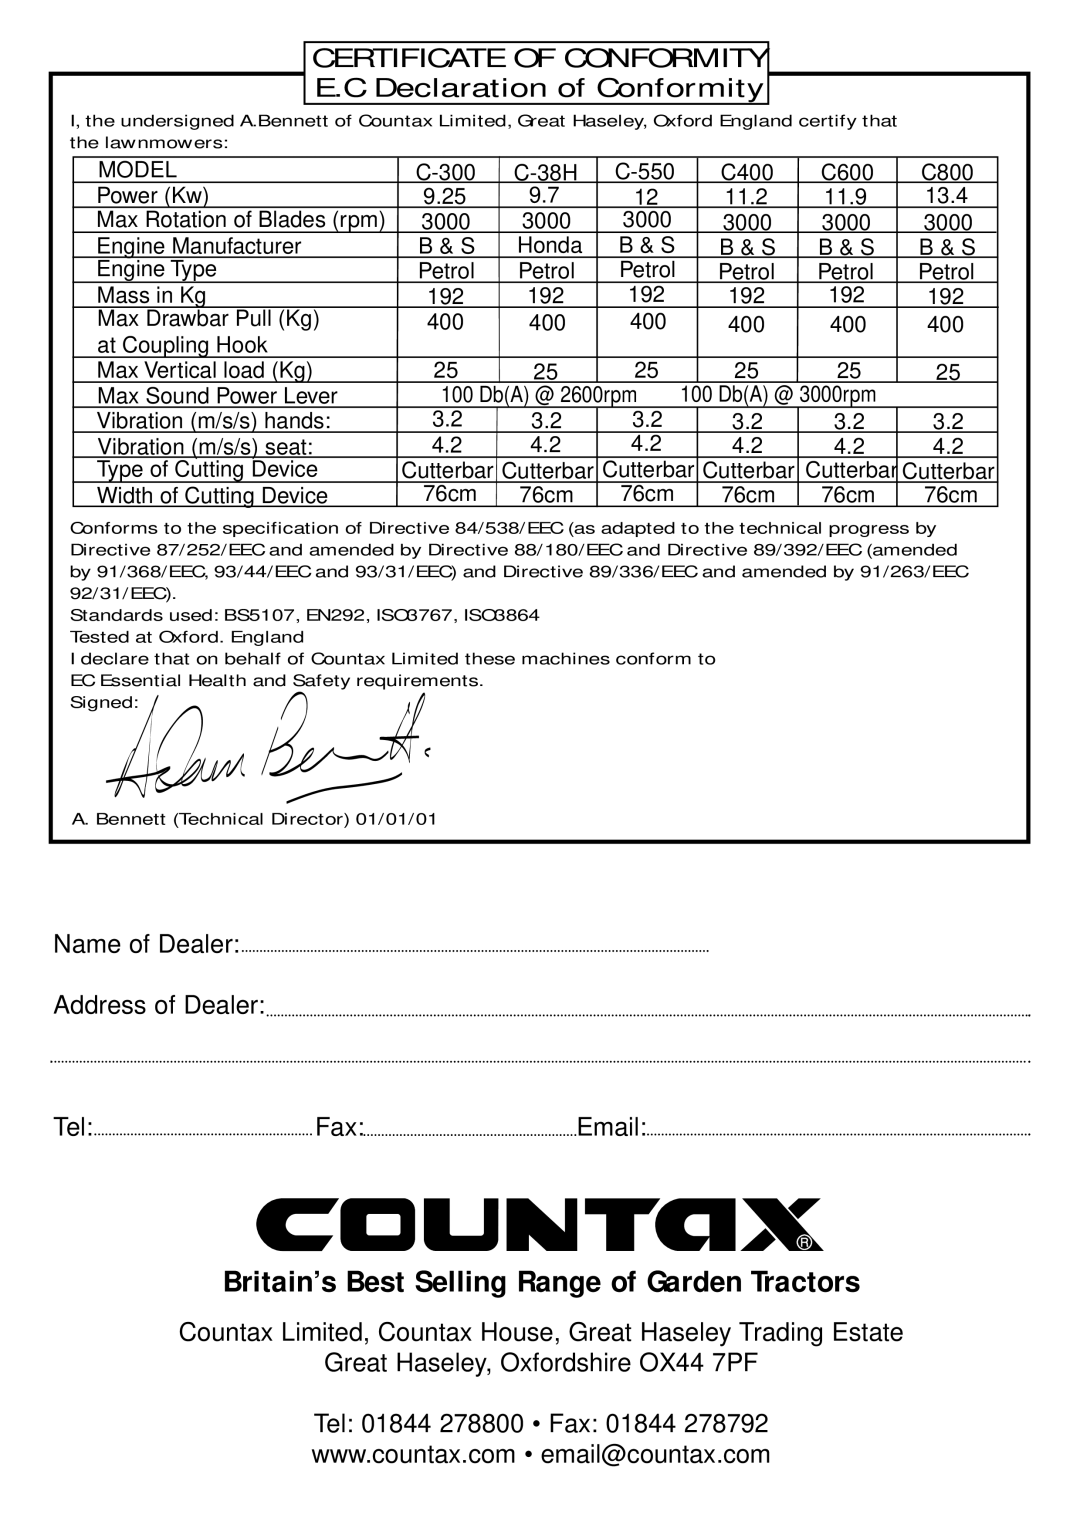 Countax manual Name of Dealer Address of Dealer TelFaxEmail, Britain’s Best Selling Range of Garden Tractors 